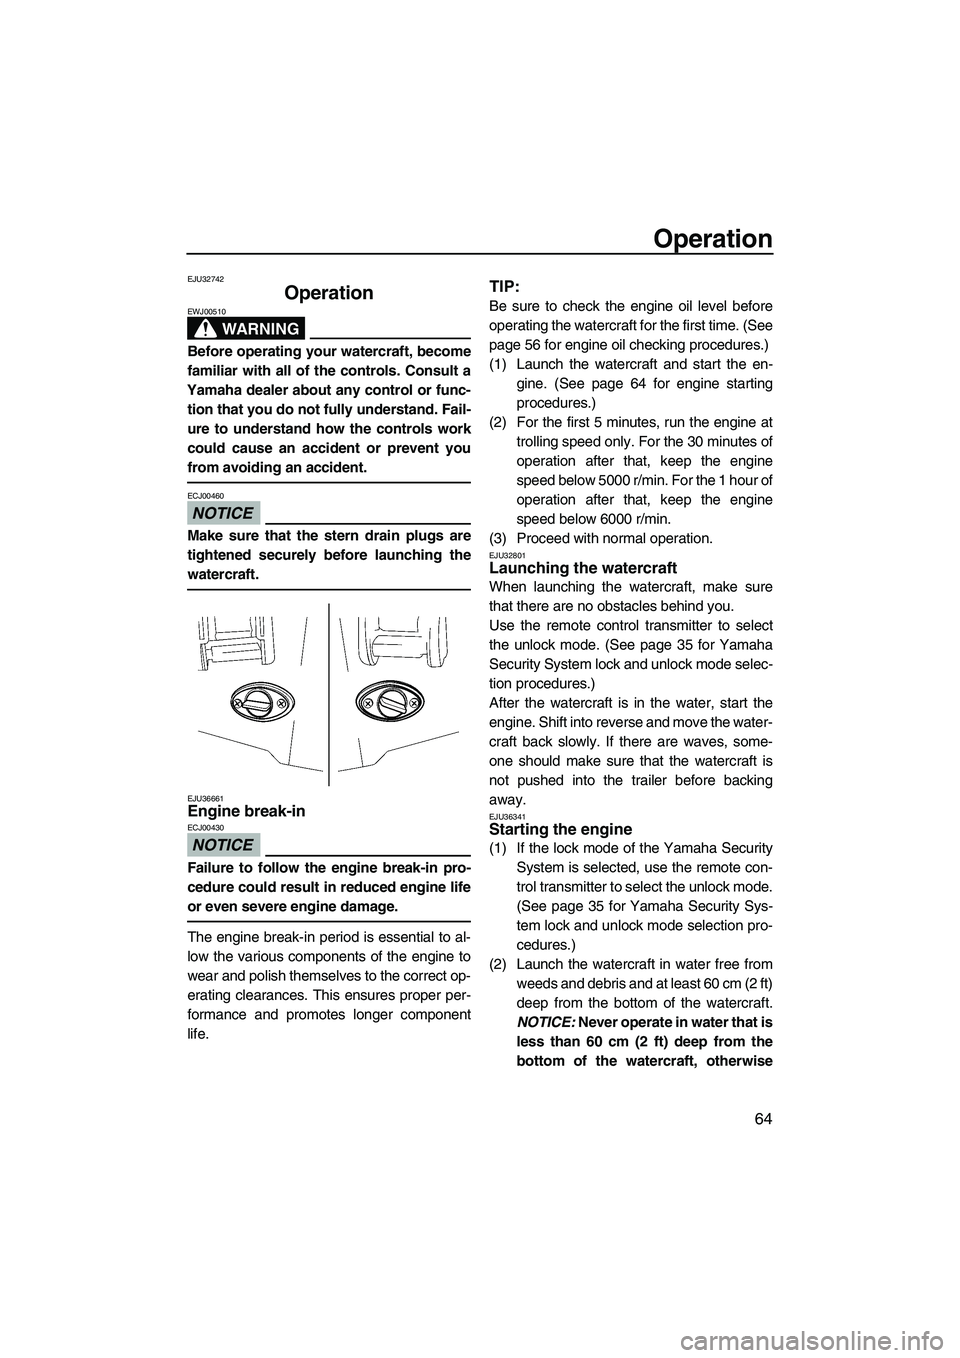 YAMAHA SVHO 2009  Owners Manual Operation
64
EJU32742
Operation 
WARNING
EWJ00510
Before operating your watercraft, become
familiar with all of the controls. Consult a
Yamaha dealer about any control or func-
tion that you do not fu